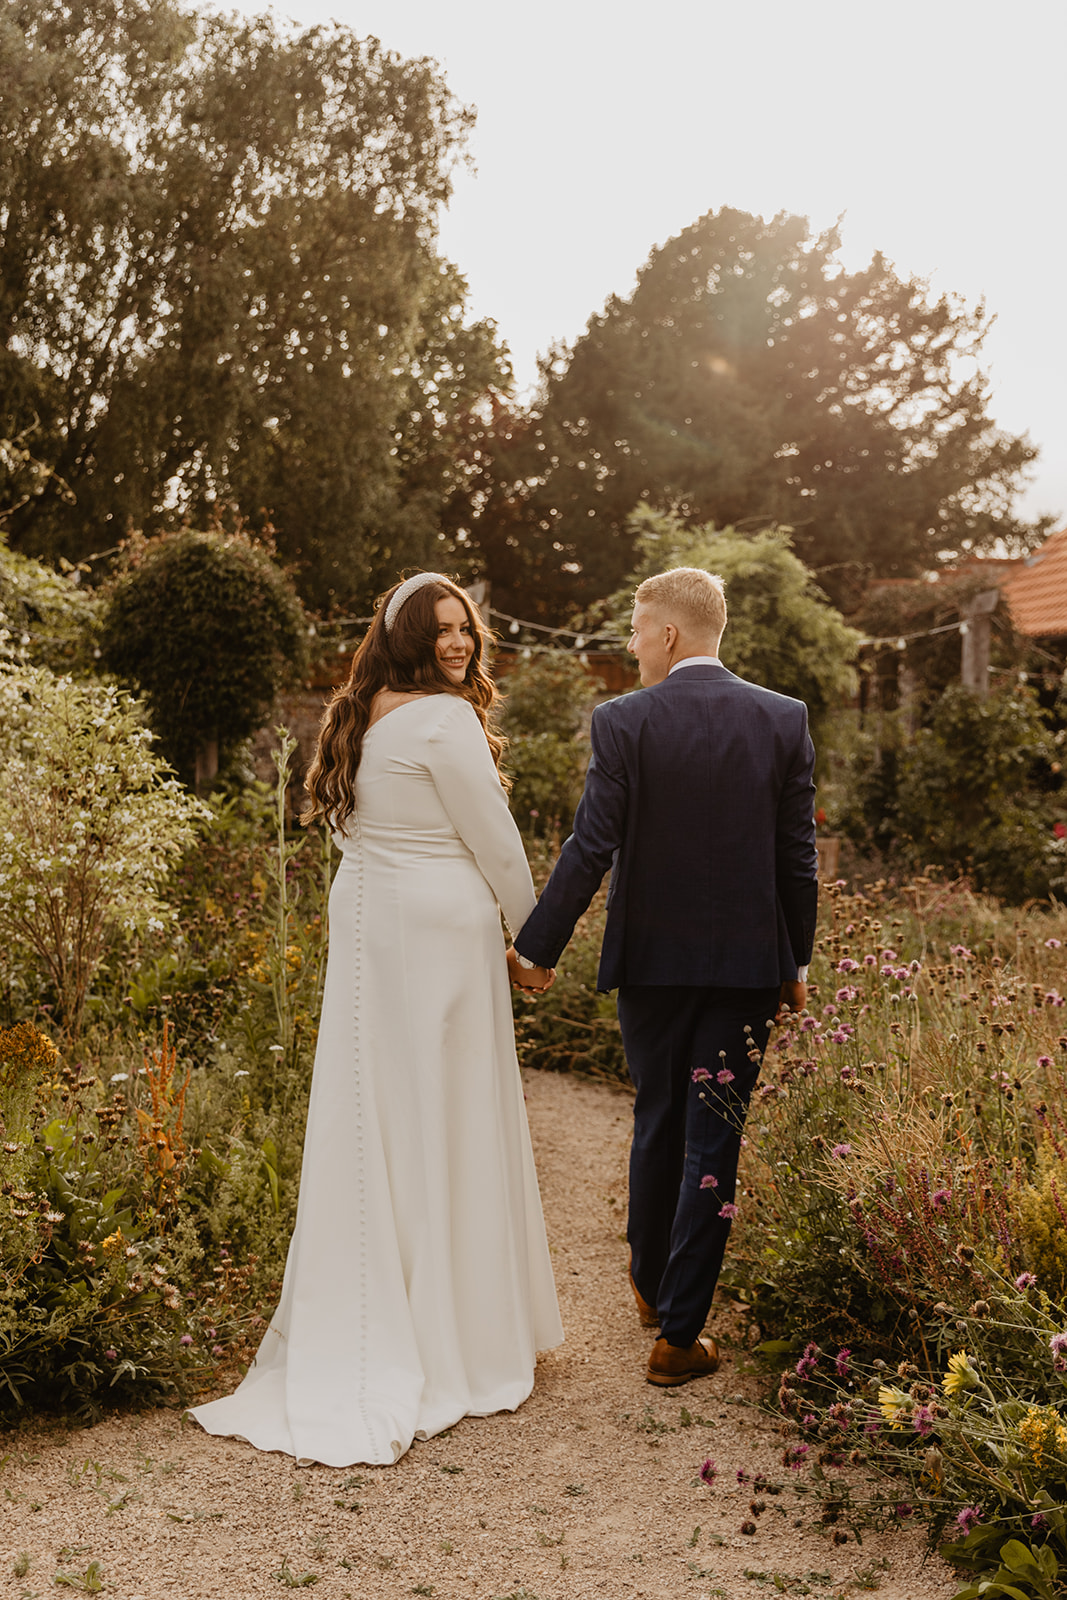 Bride and Groom at a Field Place Manor House Wedding in Worthing, Sussex. By Olive Joy Photography